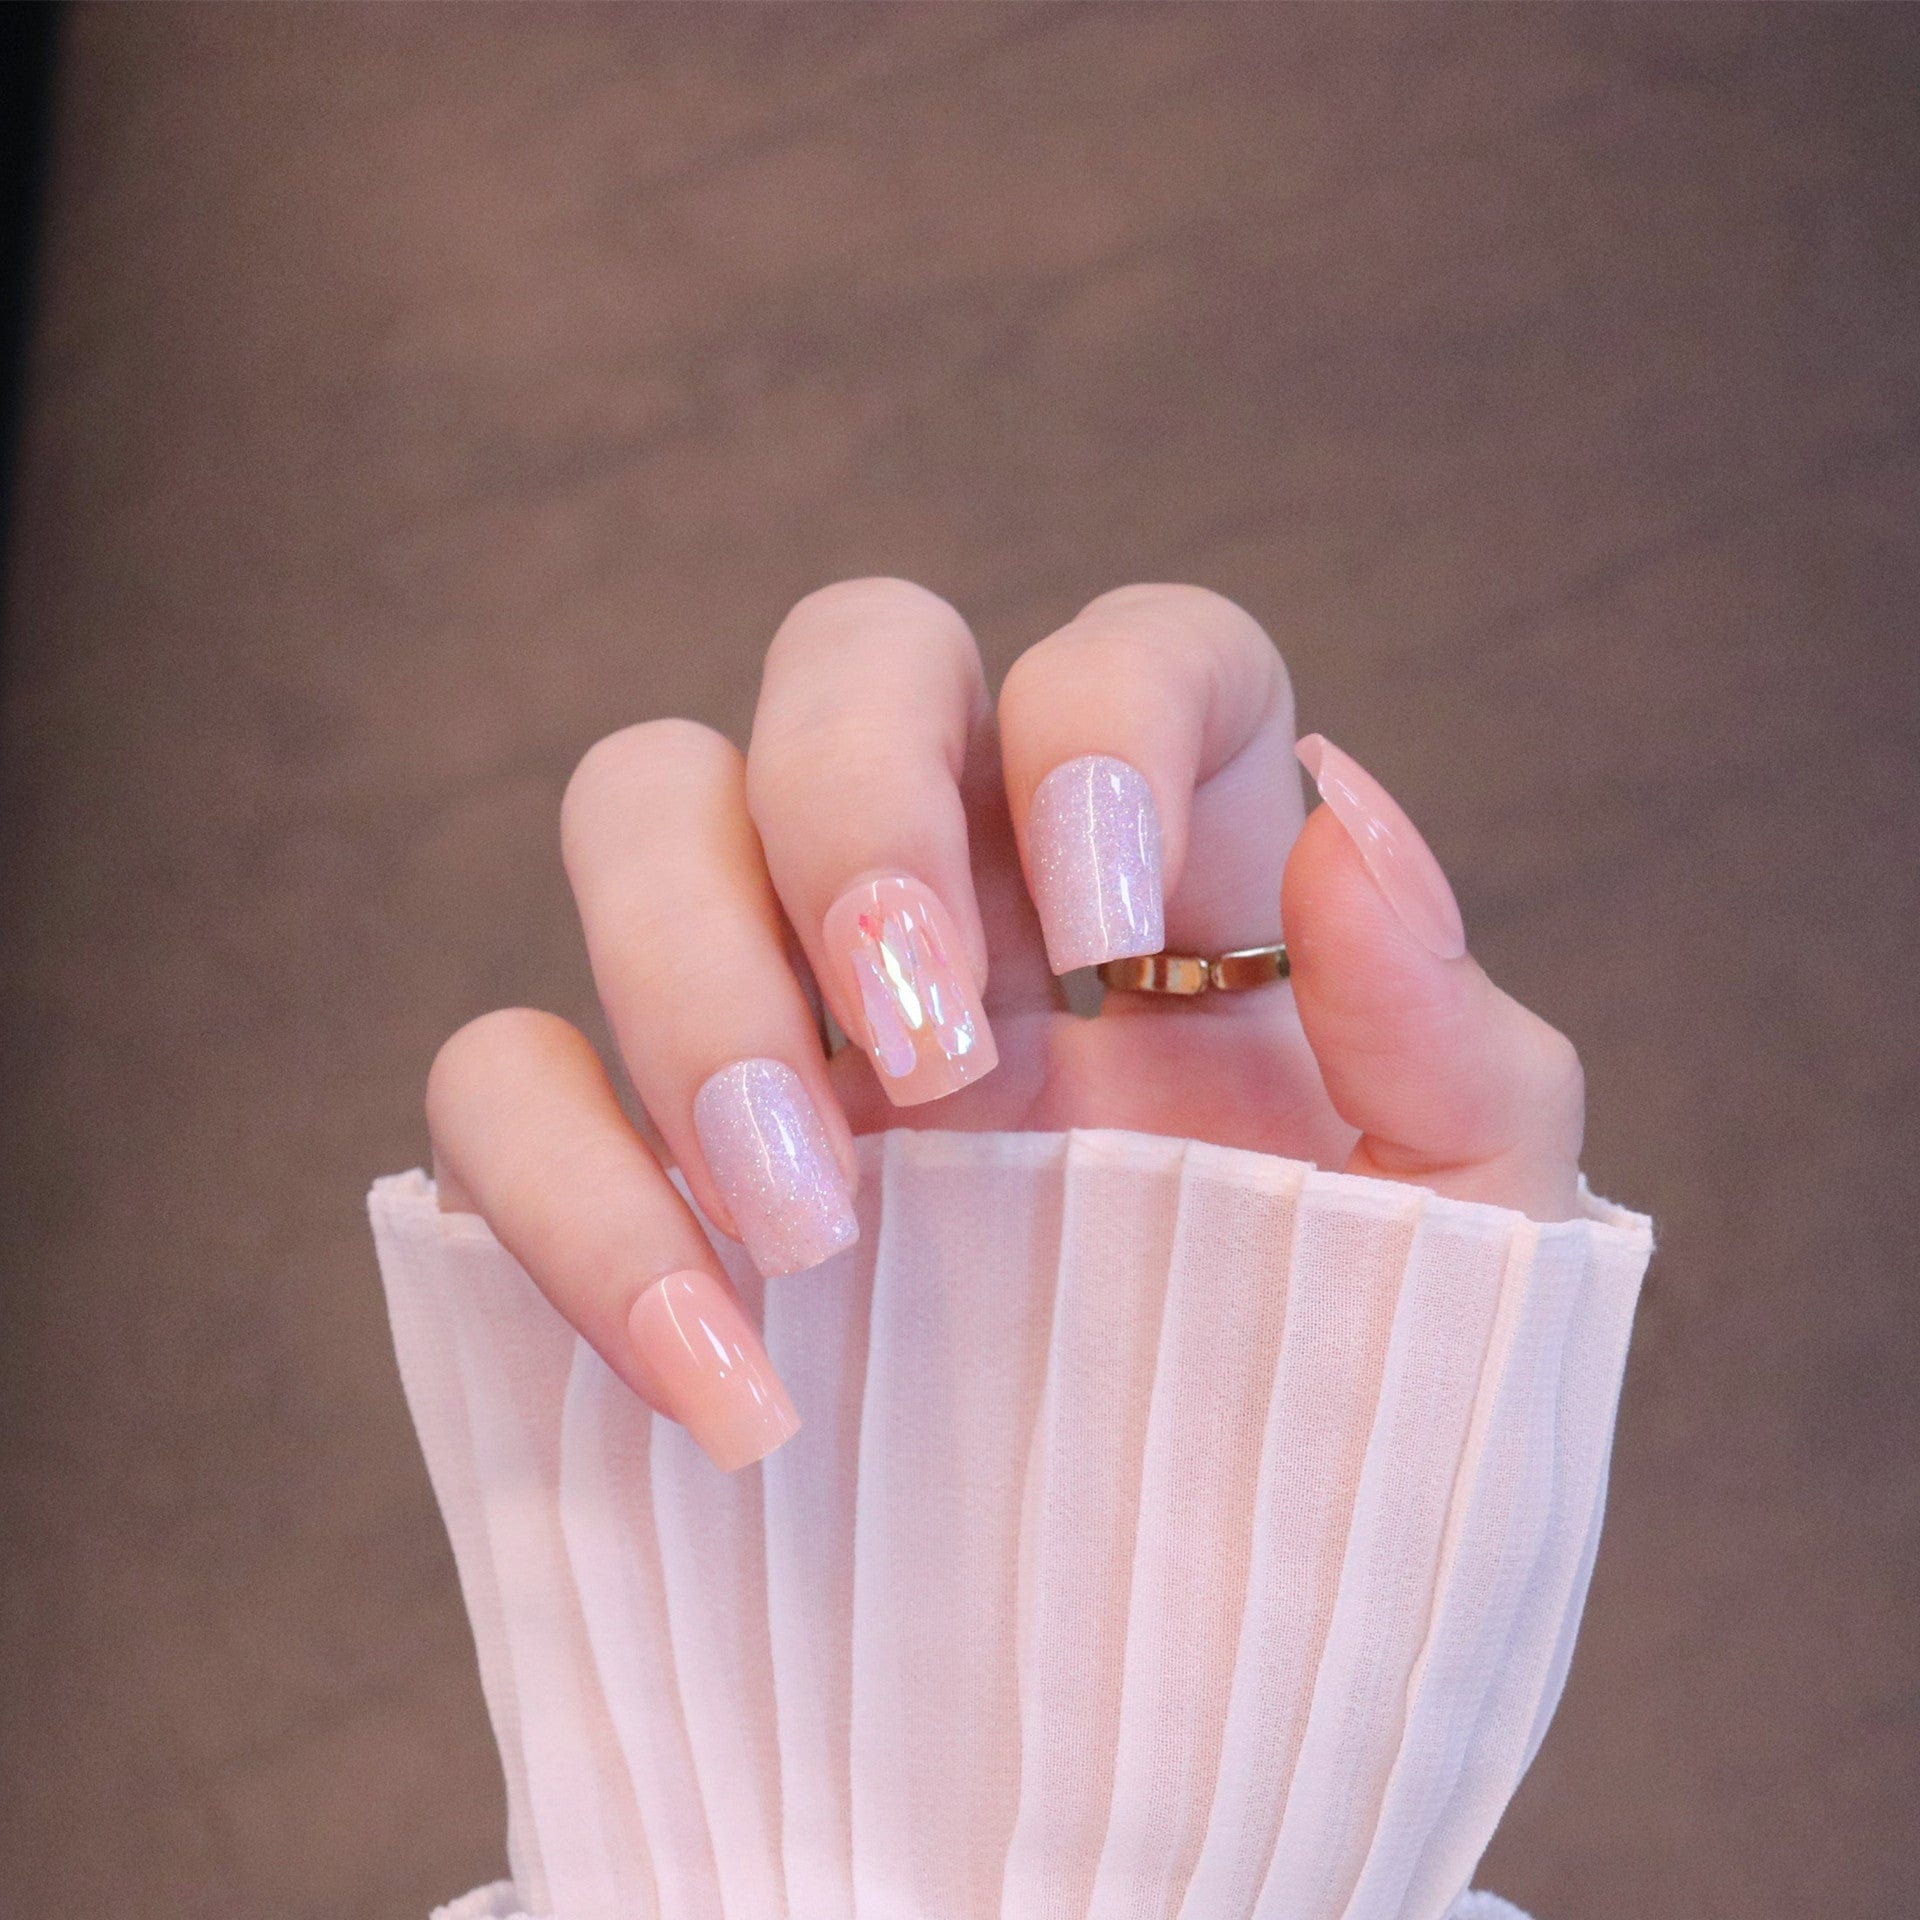 Medium Square Light Pink Press On Nails with Iridescent Flakes